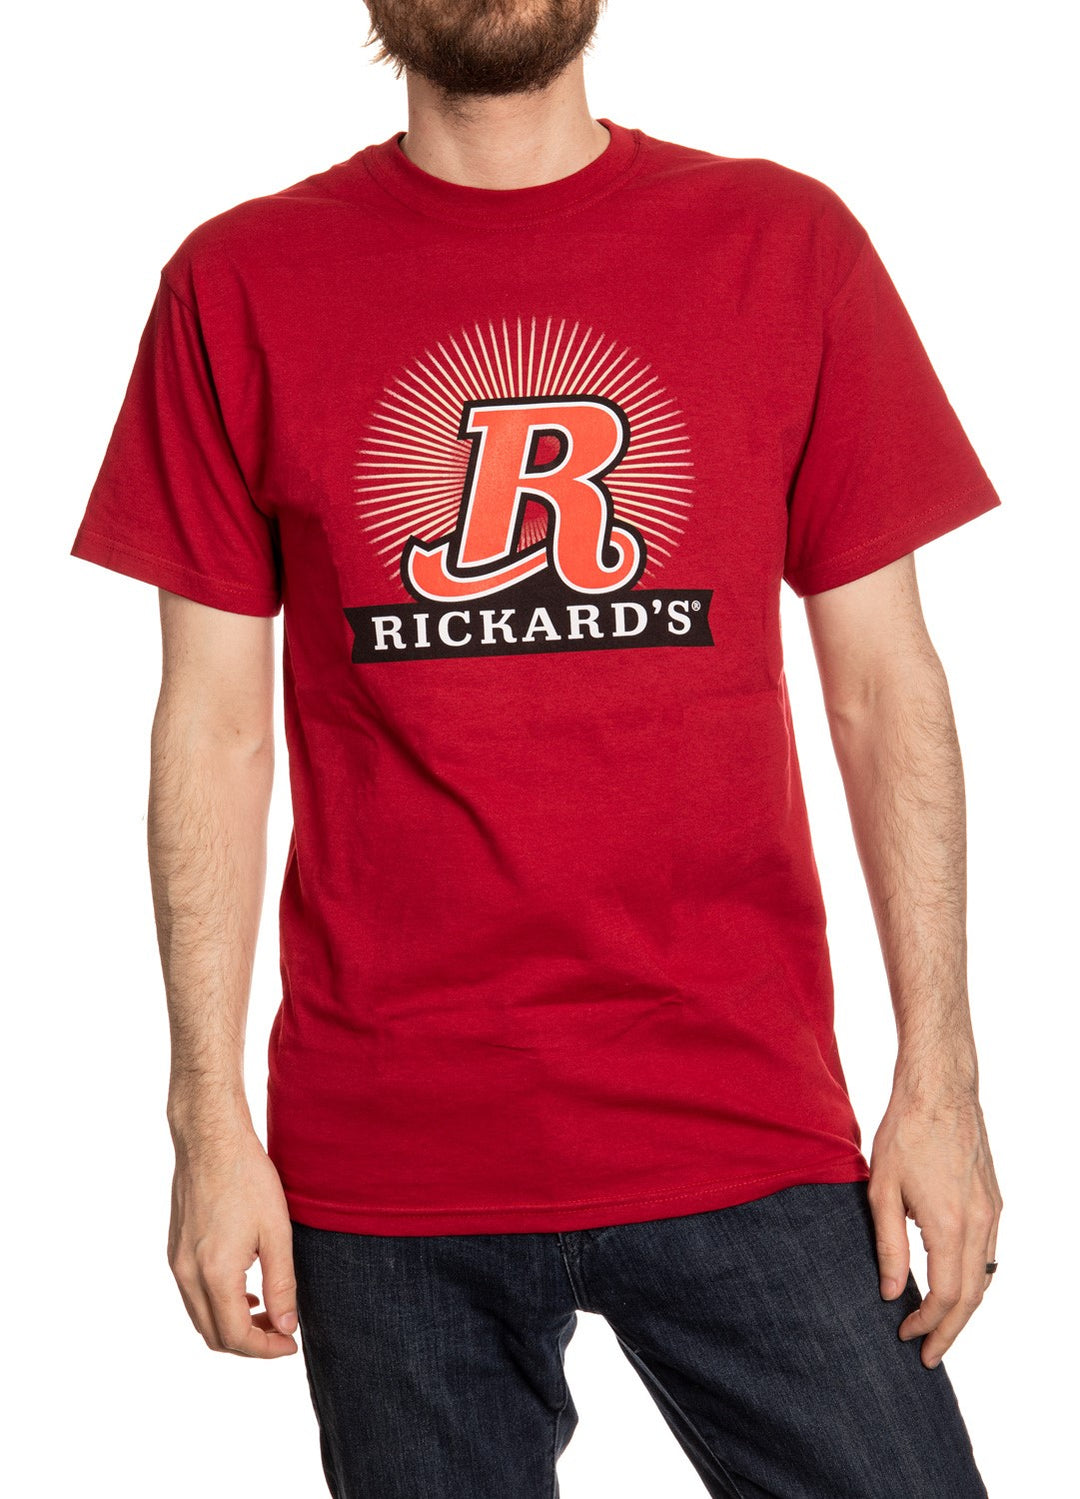 Rickards Red Classic Logo T-Shirt Front View.